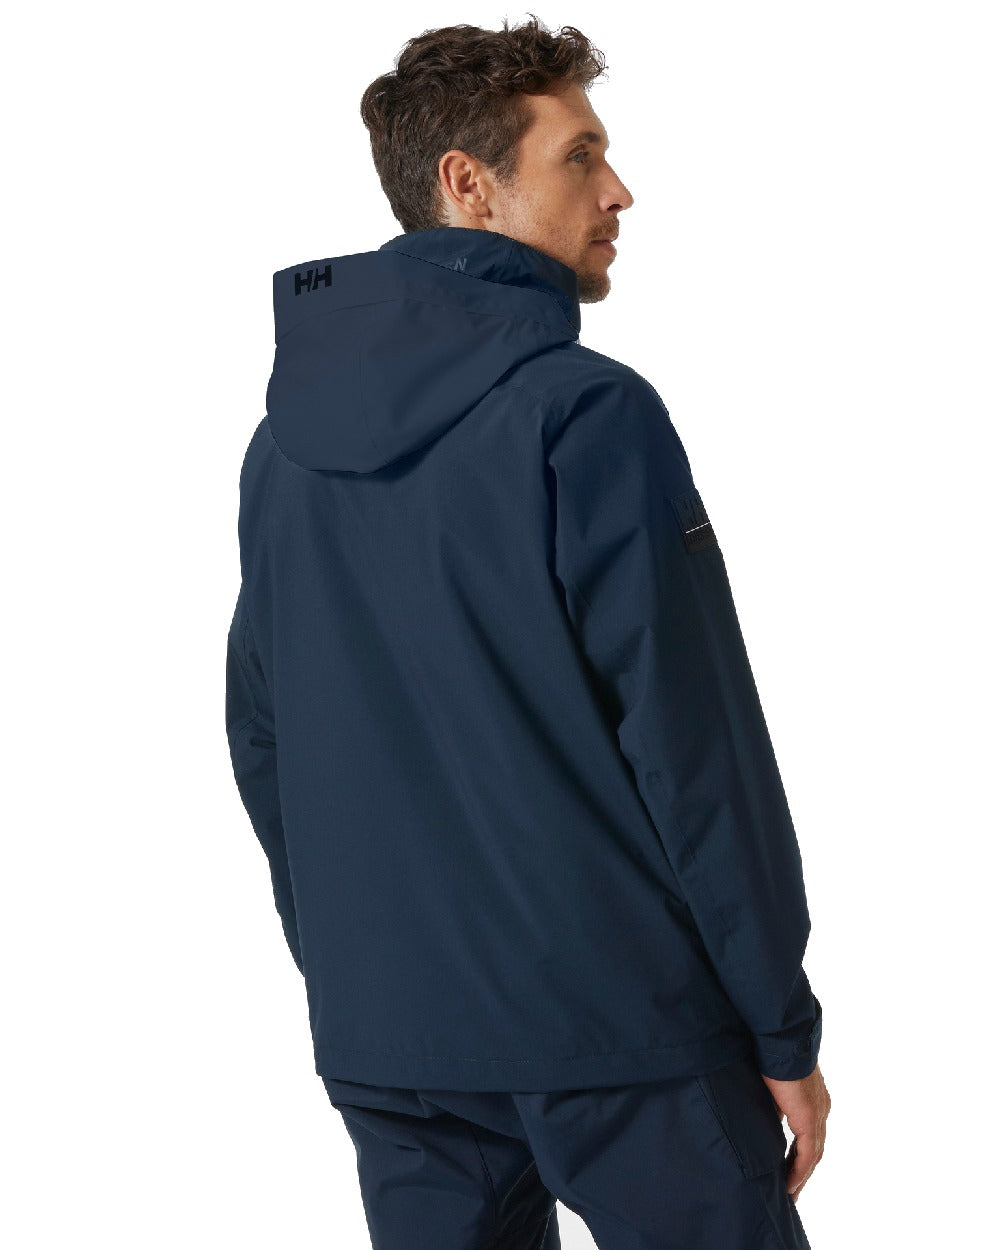 Navy coloured Helly Hansen Mens HP Racing Hooded Sailing Jacket on white background 